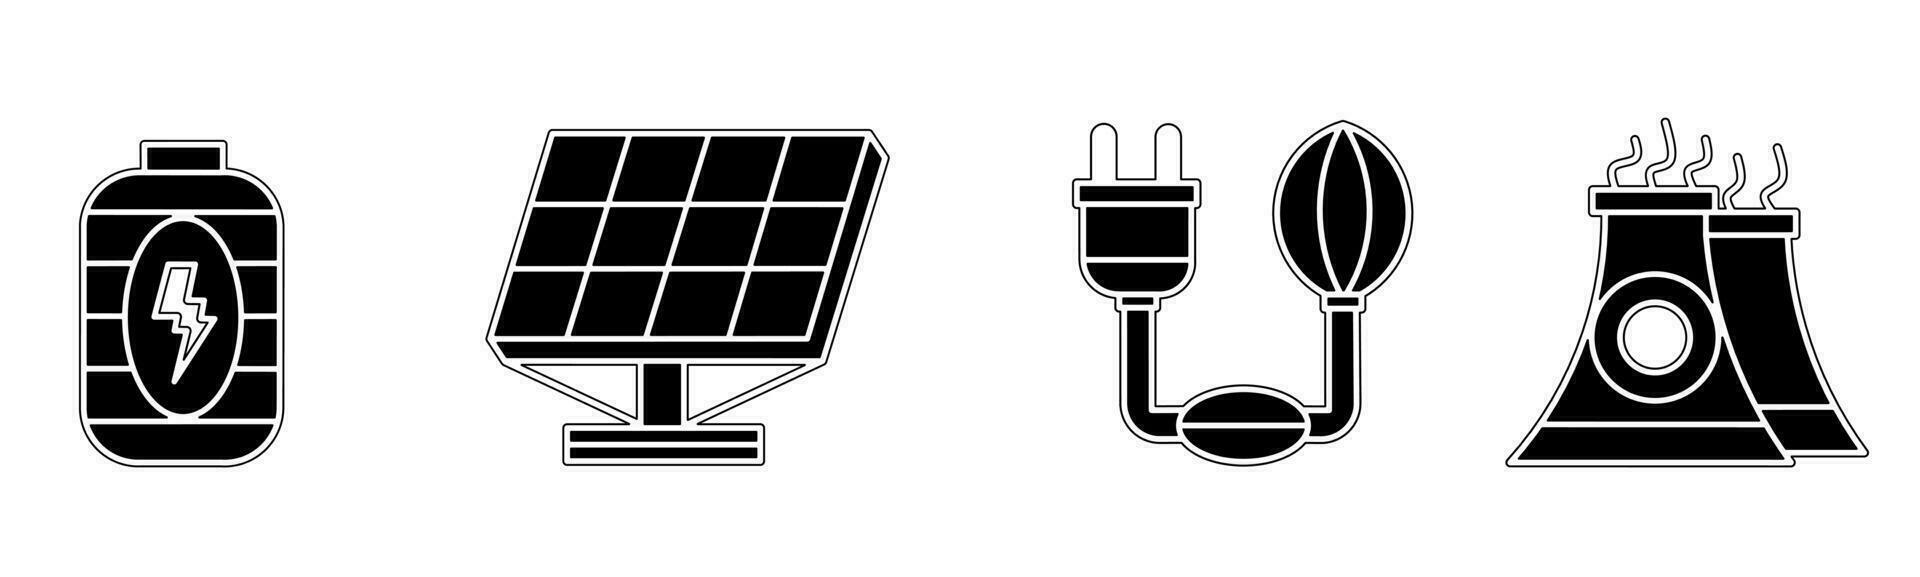 Energy icon collection. An illustration of a black energy icon. Stock vector. vector